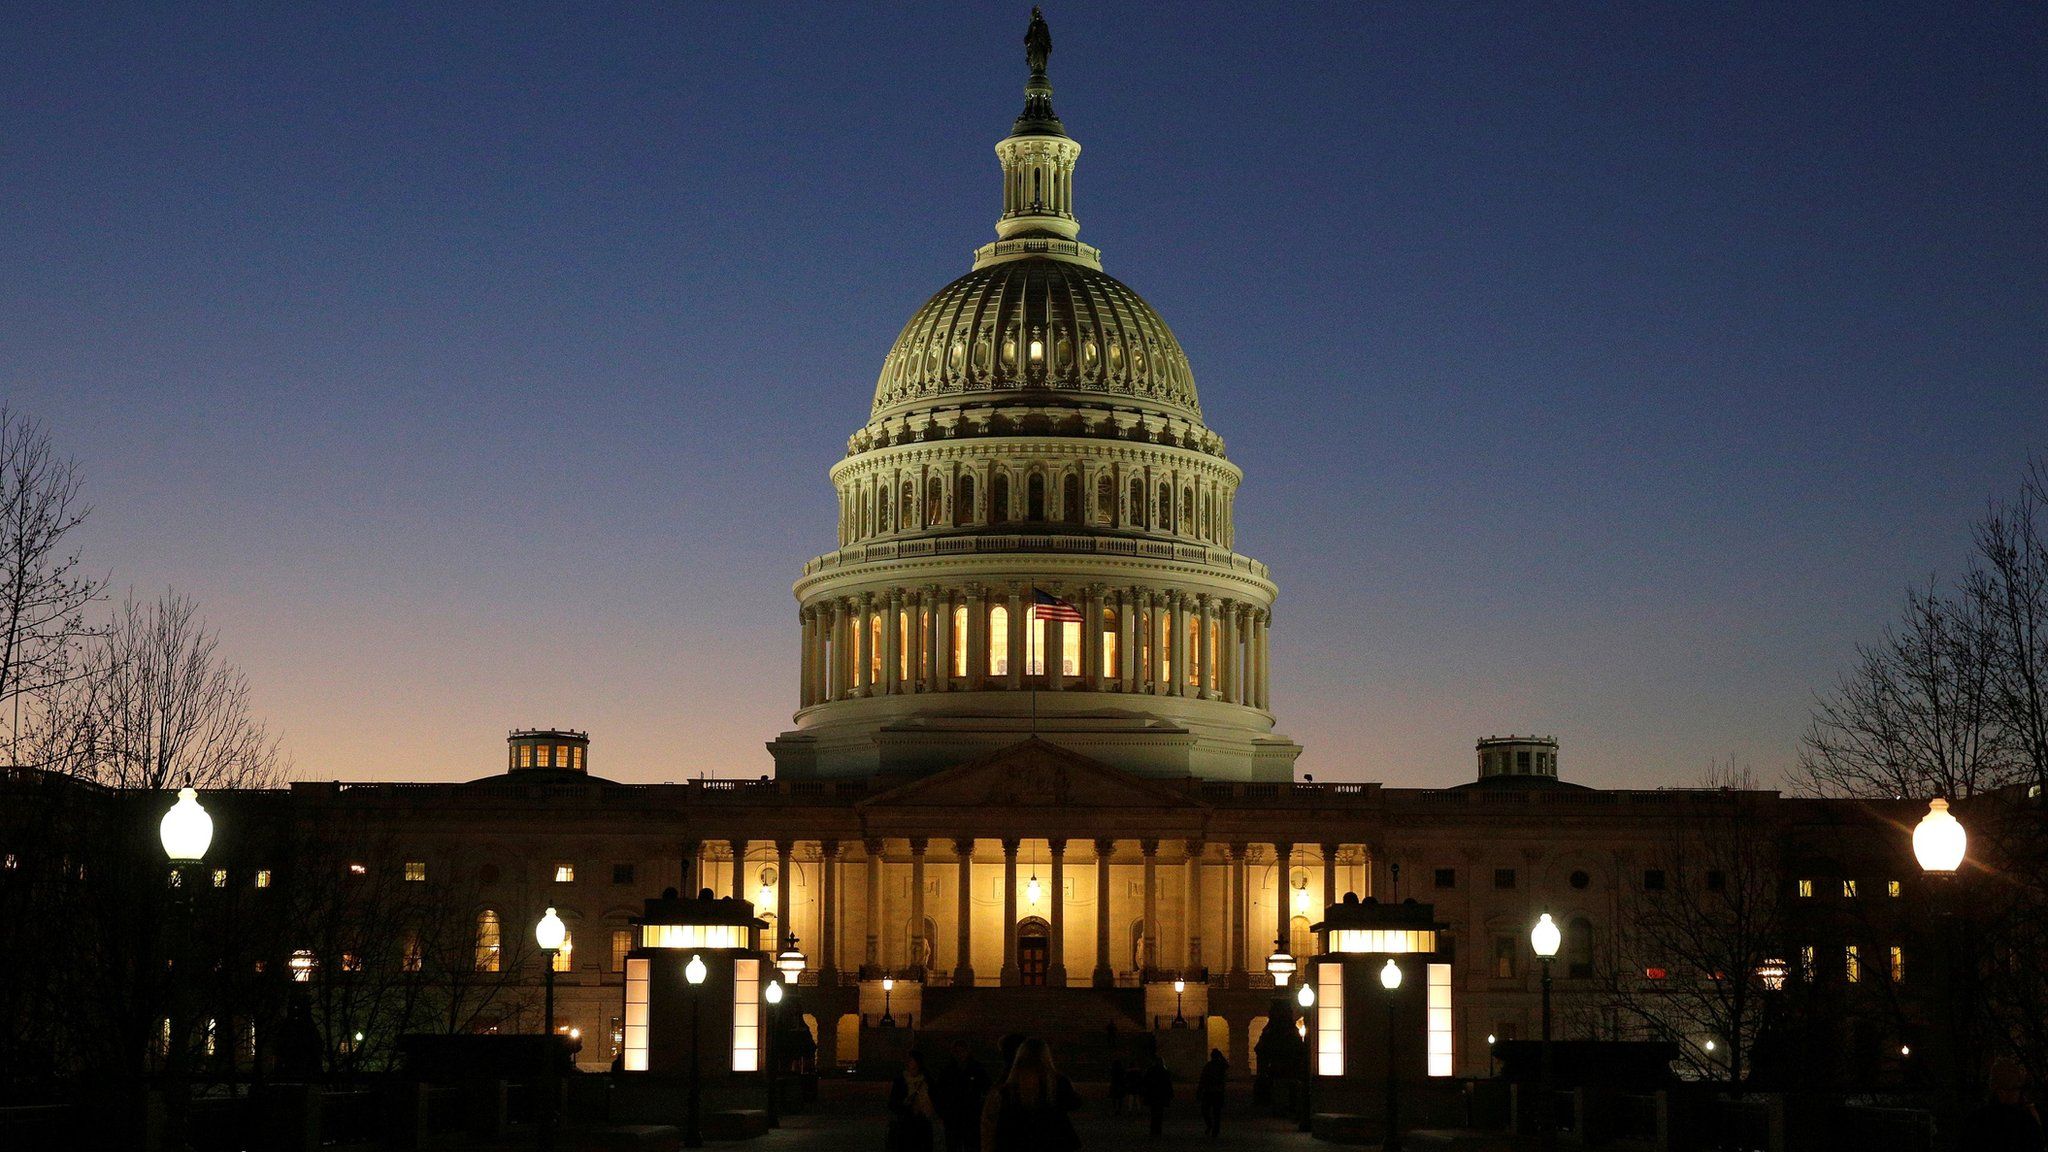 The U.S. Capitol Building is lit at sunset in Washington (December 20, 2016)